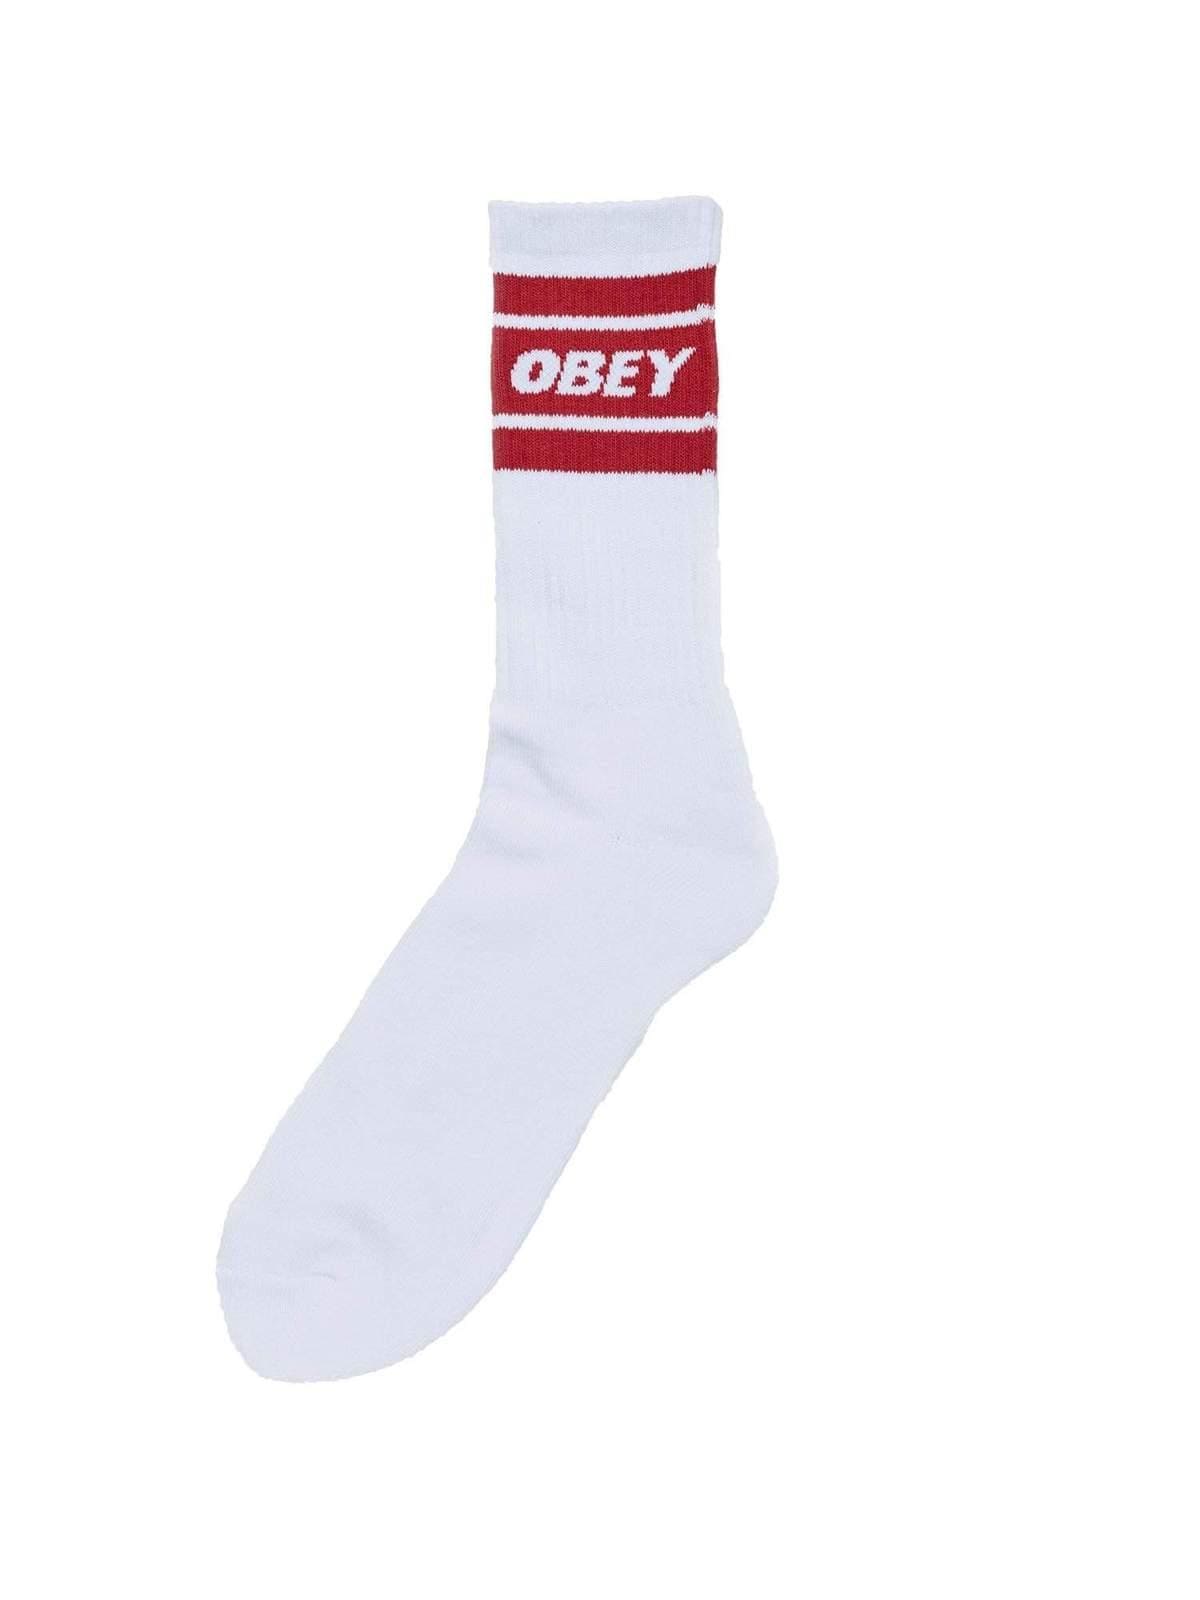 OBEY COPPER II SOCKS - Chirico Store - bianco, Calze, Obey, rosso - Obey